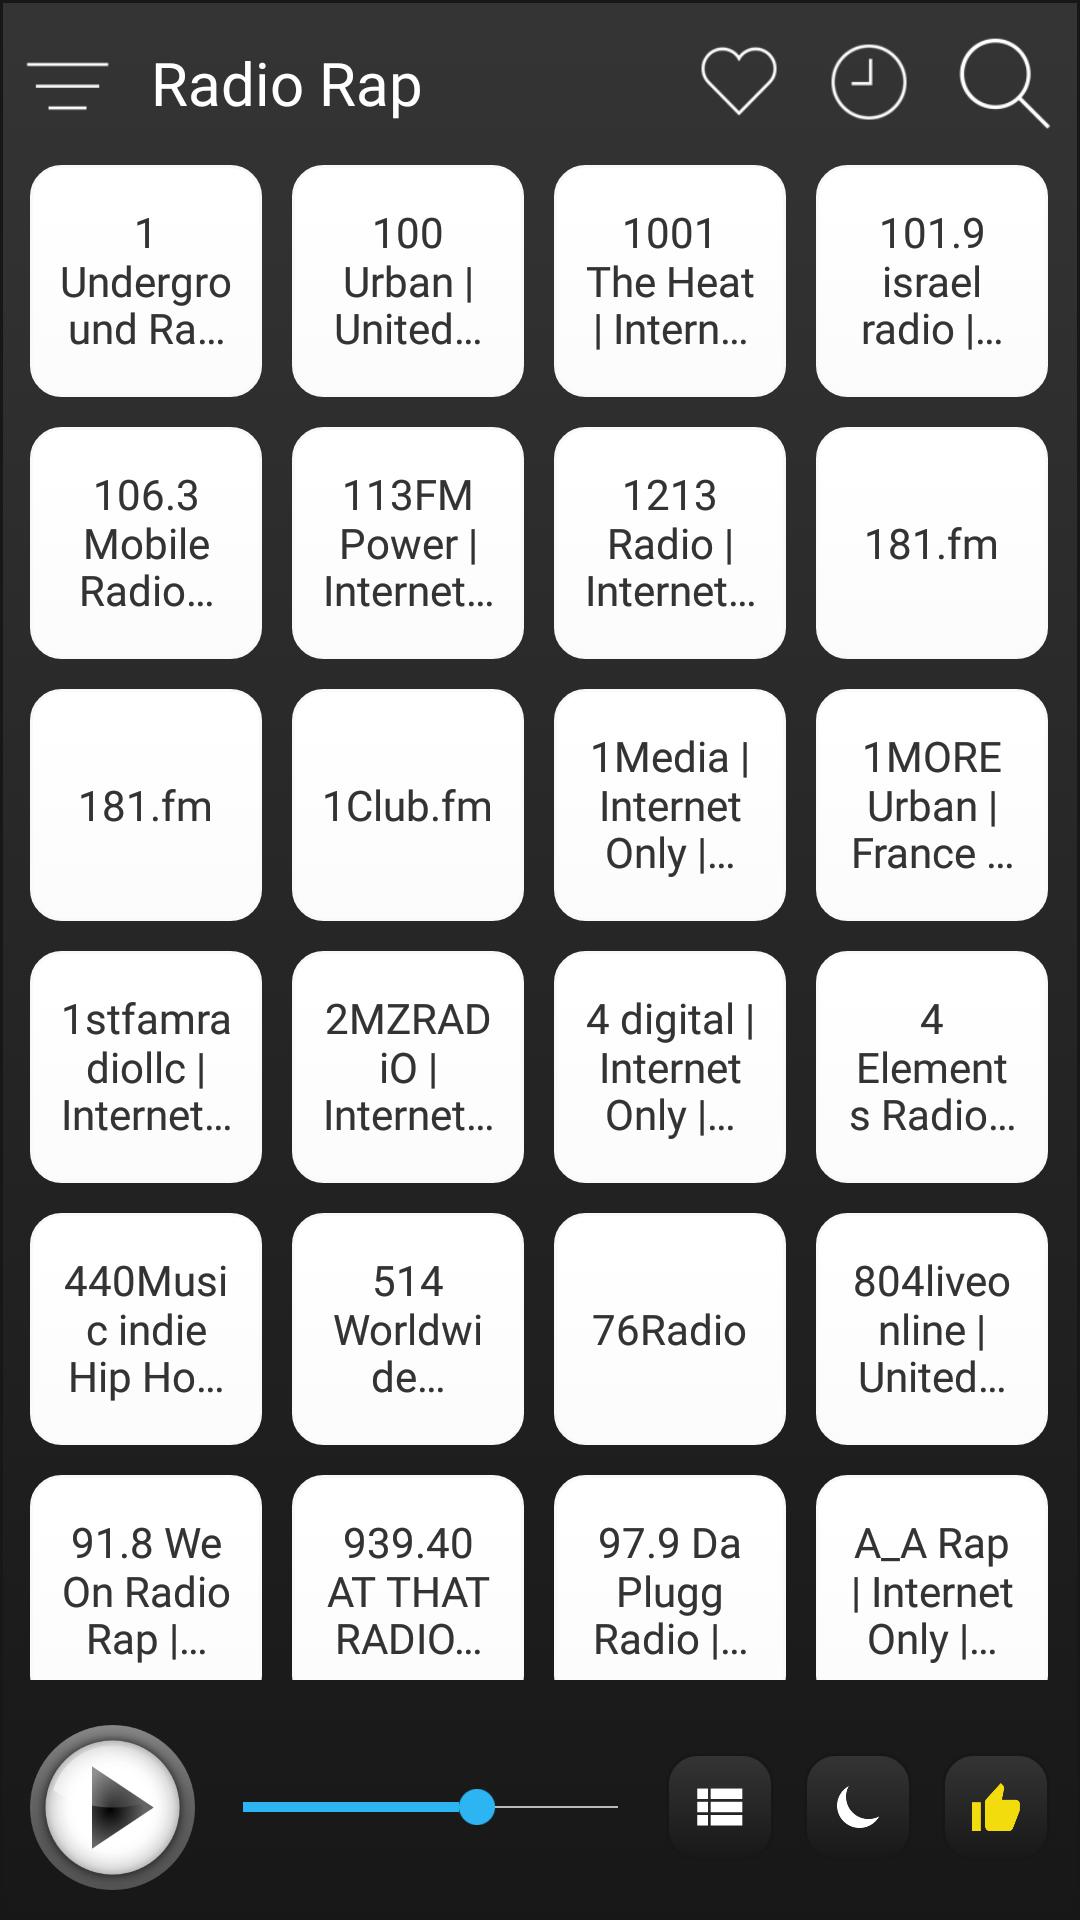 Rap Radio Stations Online - Rap FM AM Music for Android - APK Download